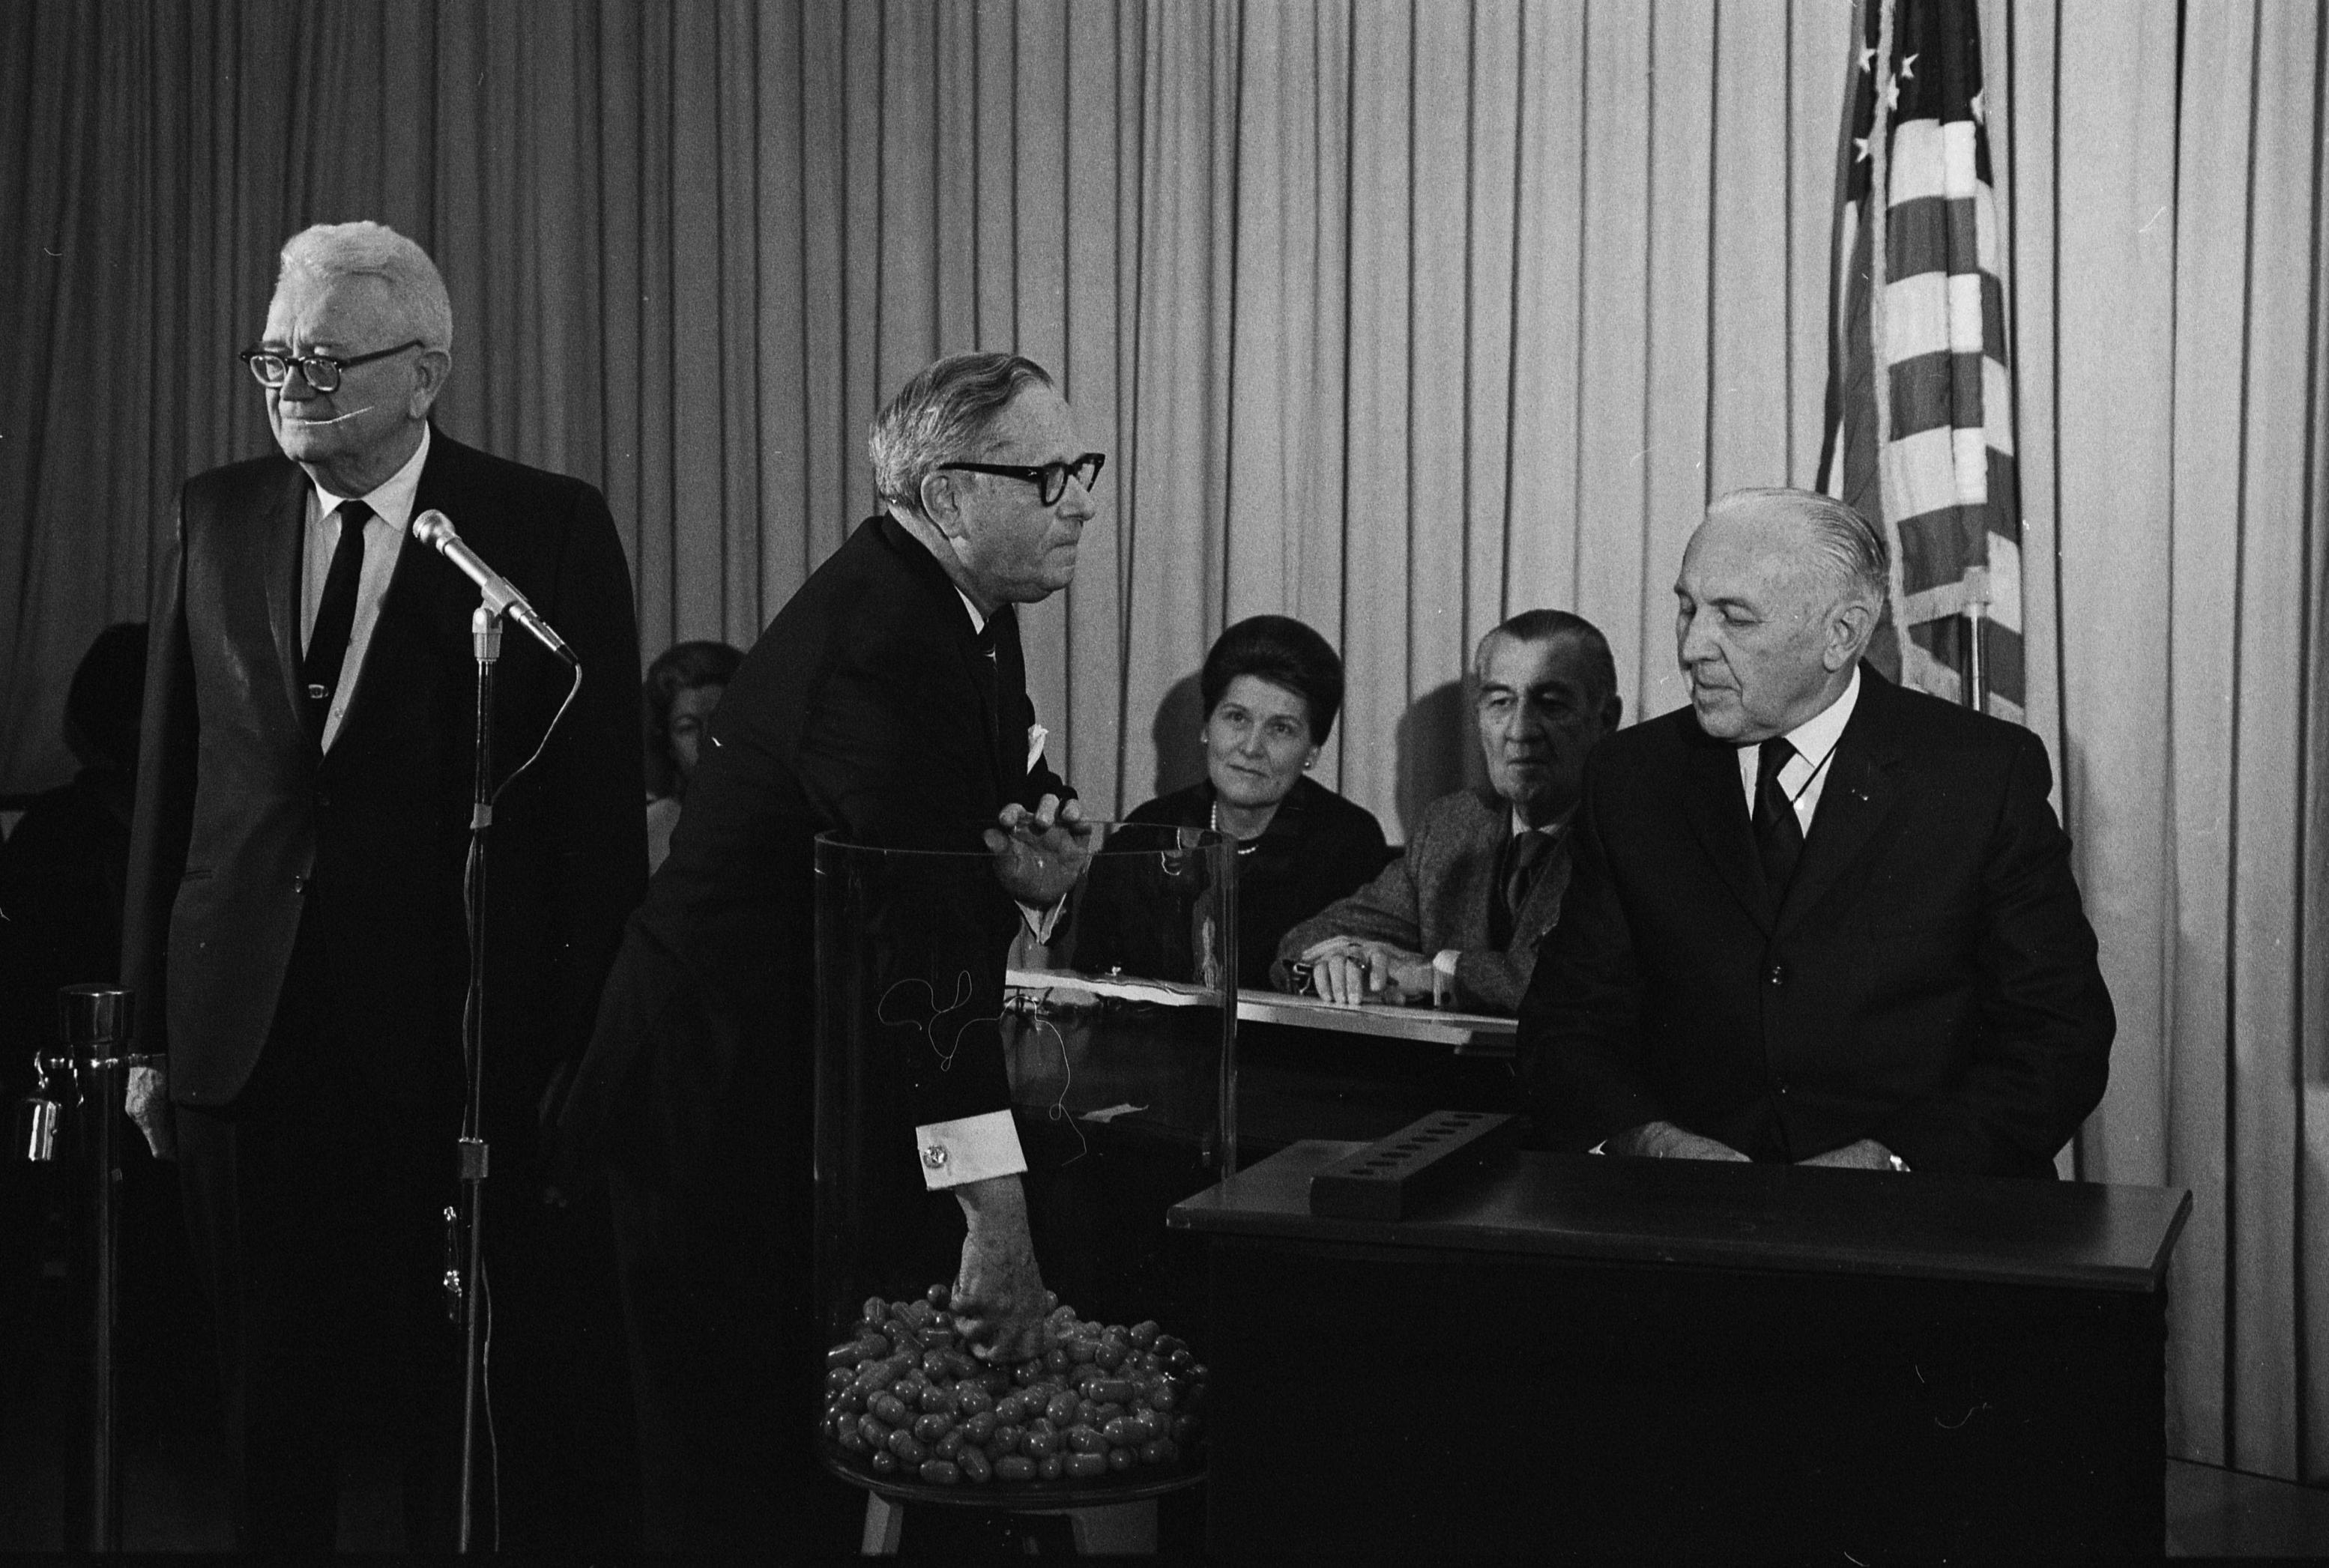 Representative Alexander Pirnie (R-NY) drawing the first number in the Vietnam draft for 1970. (Source: Library of Congress)